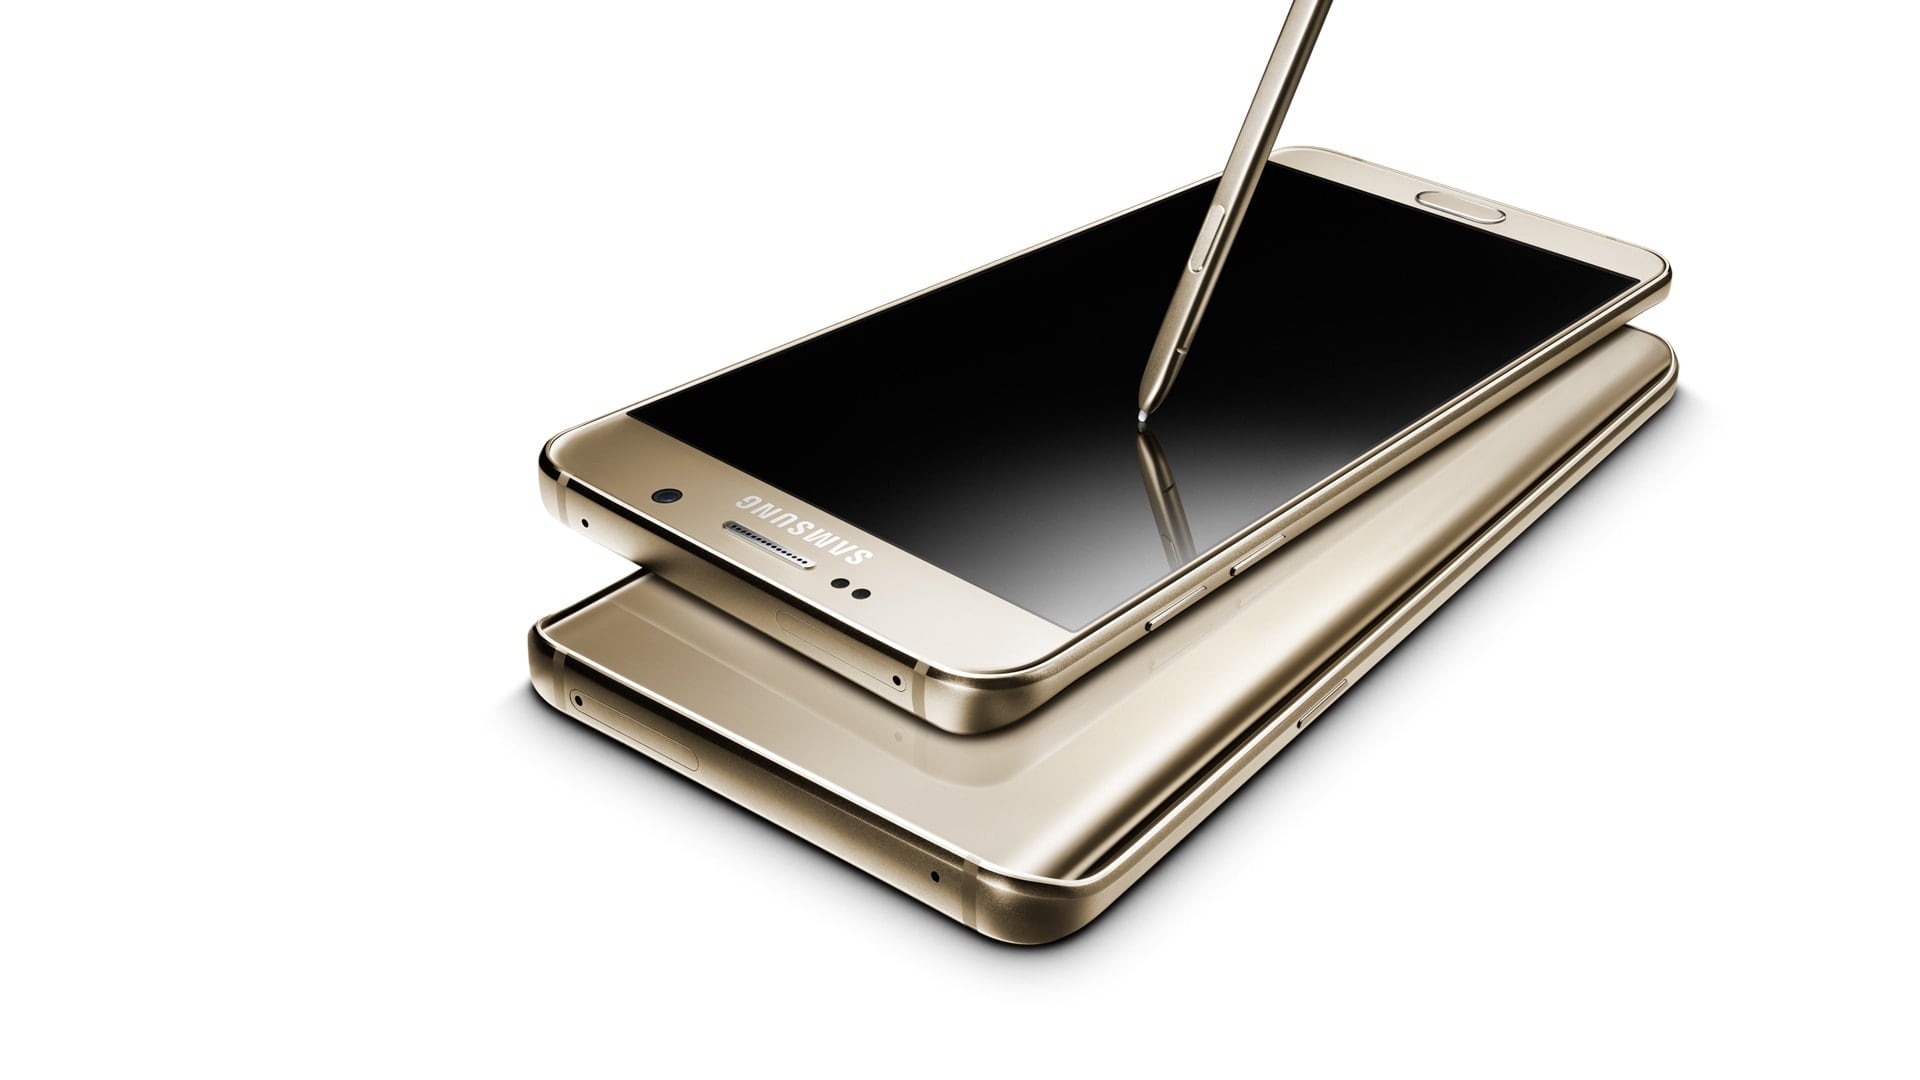 Samsung Galaxy Note 5 Wallpapers